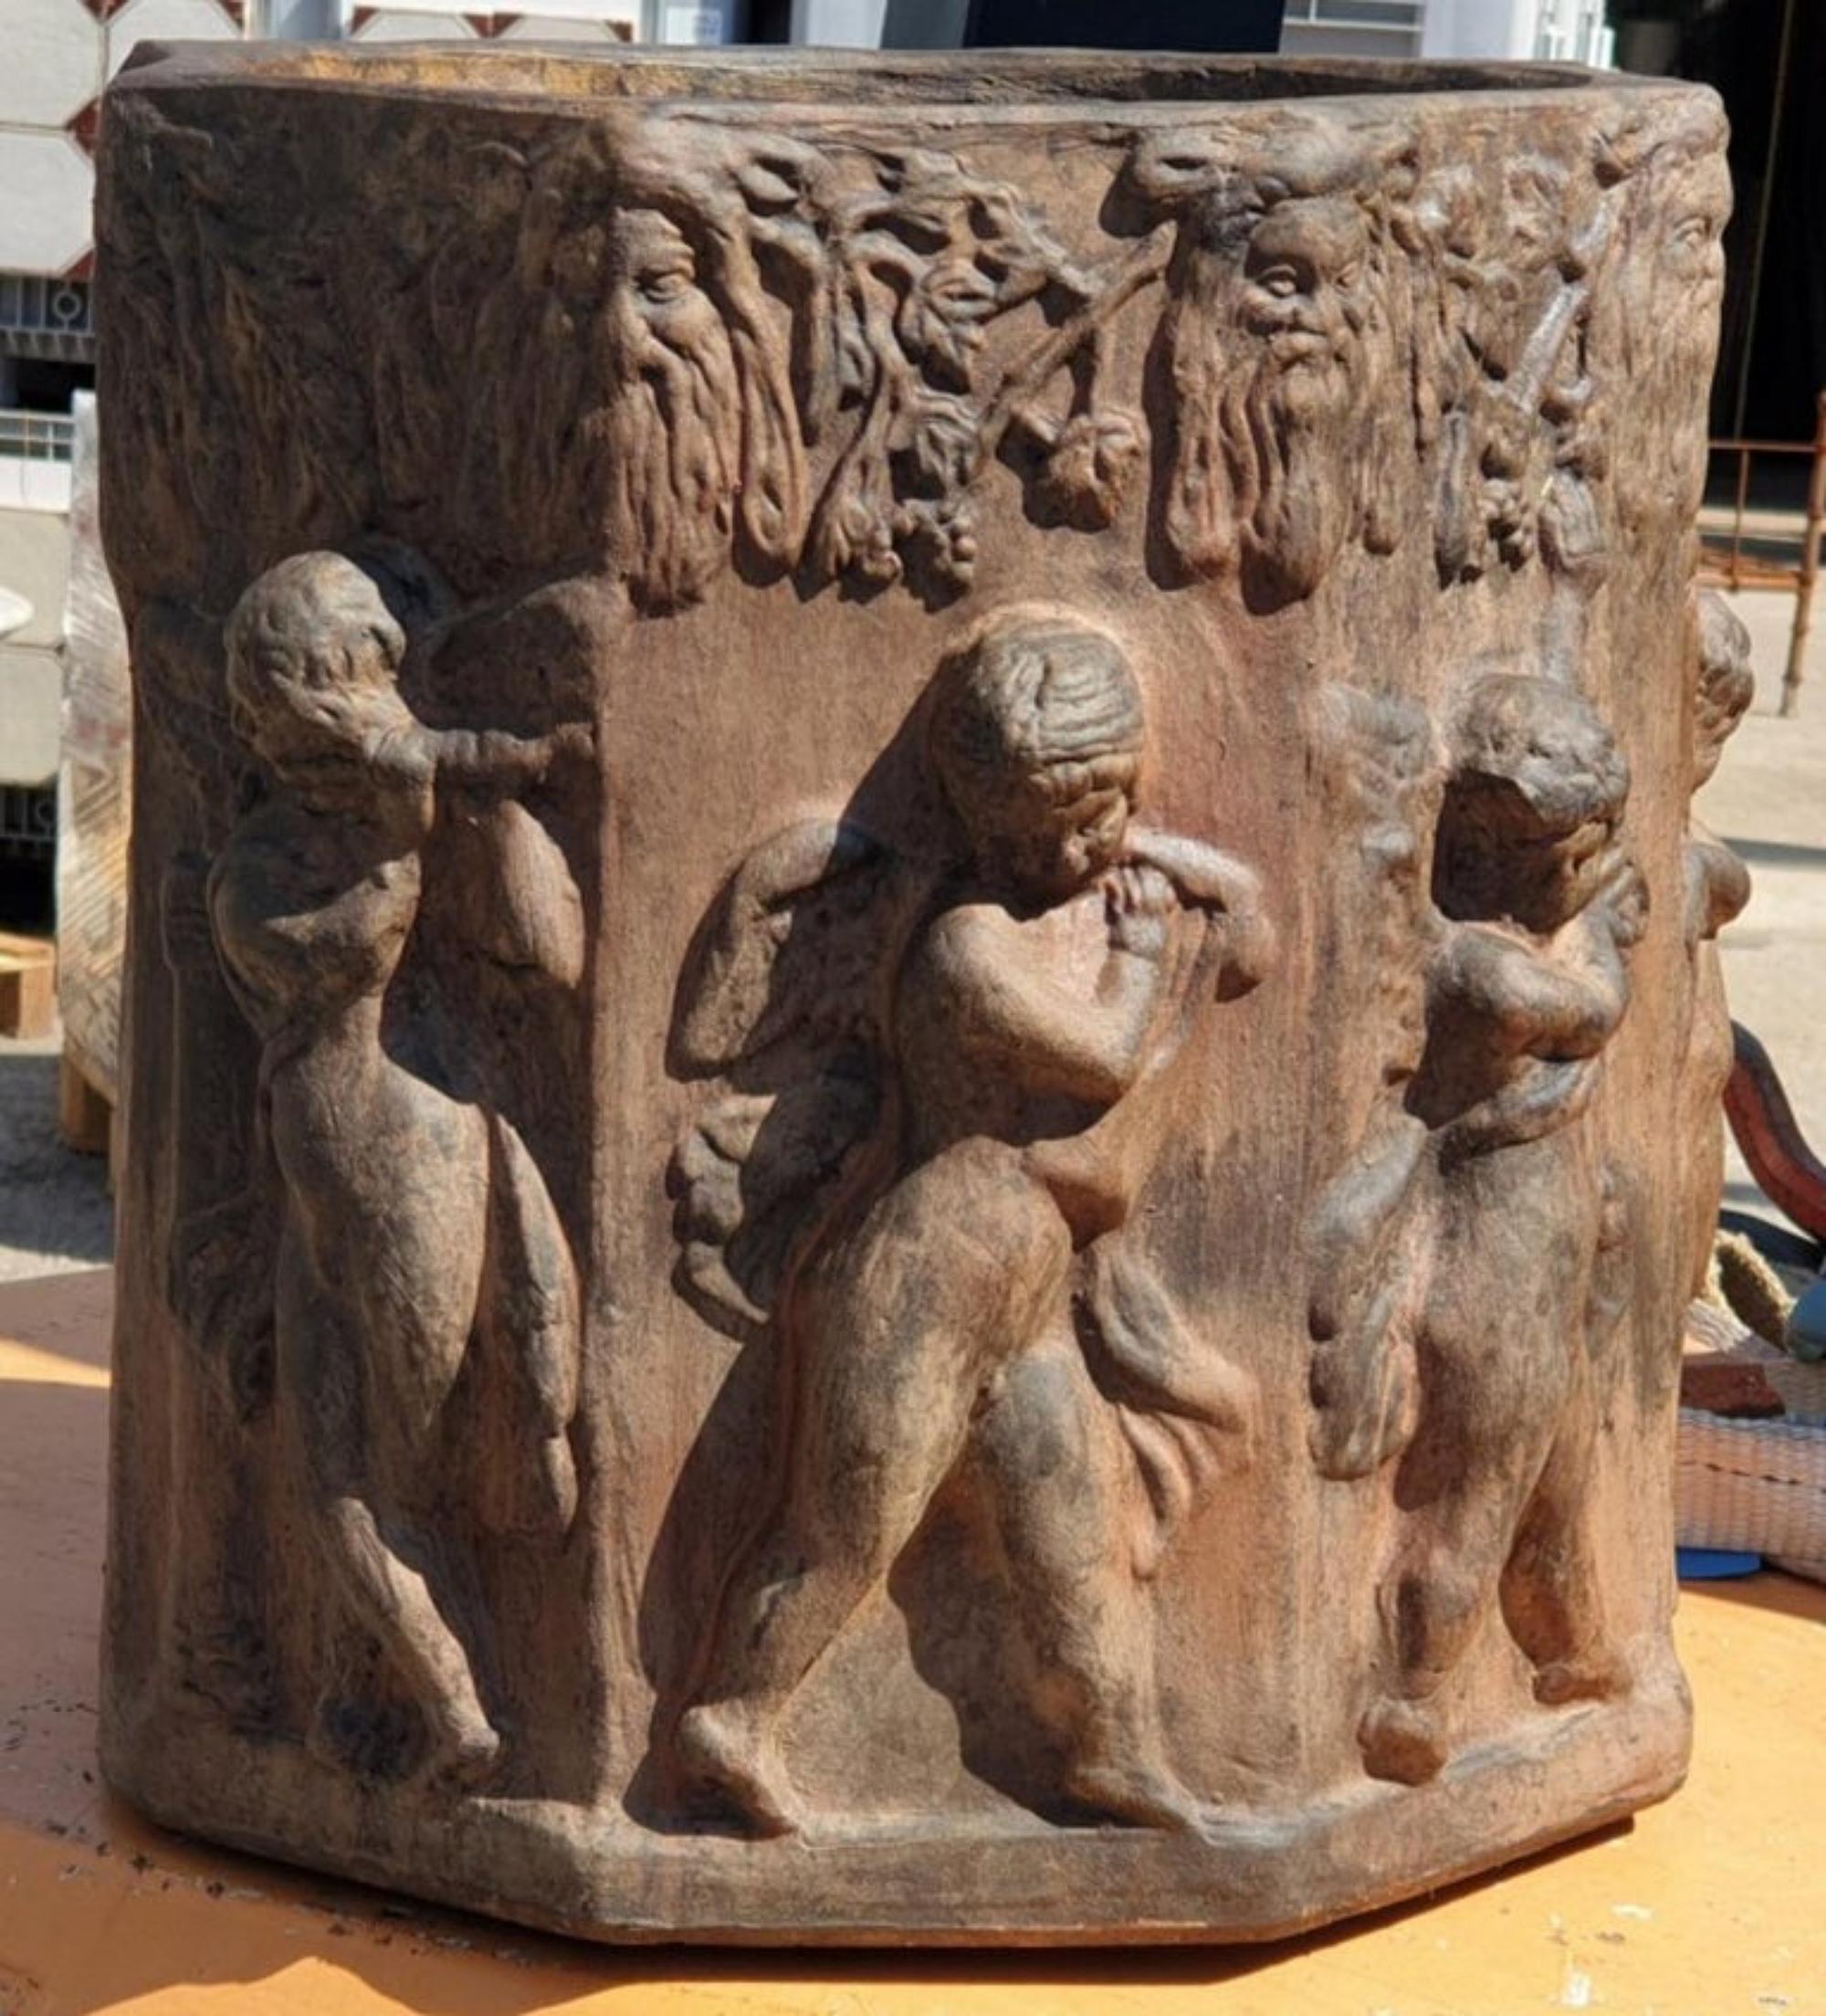 Octagonal cachepot ornated with putti in Tuscan terracotta.
Measures: height: 30cm
diameter: 30cm
10kg
20th century
Good conditions.